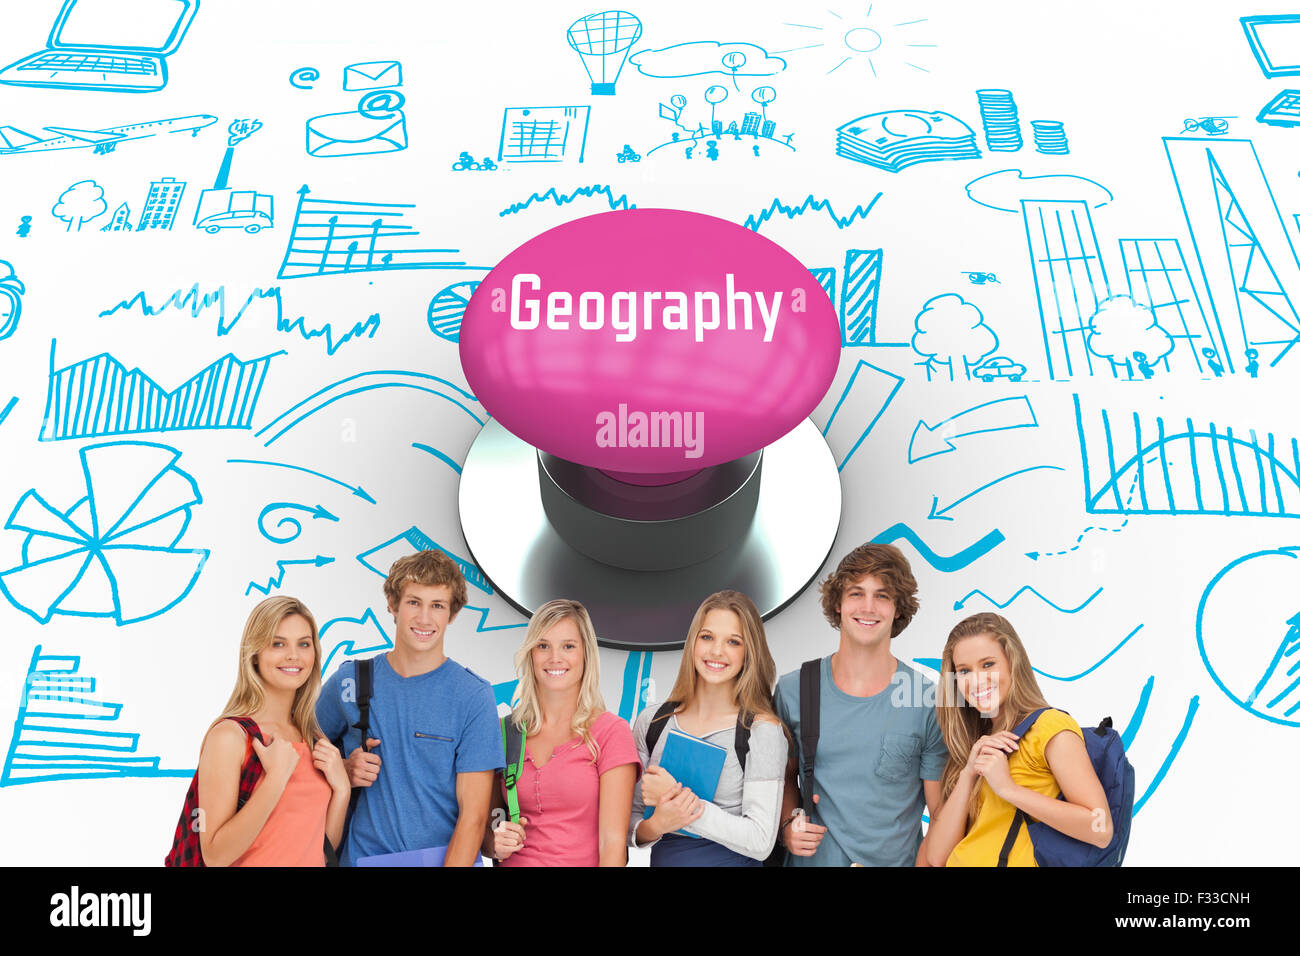 Geography against pink push button Stock Photo